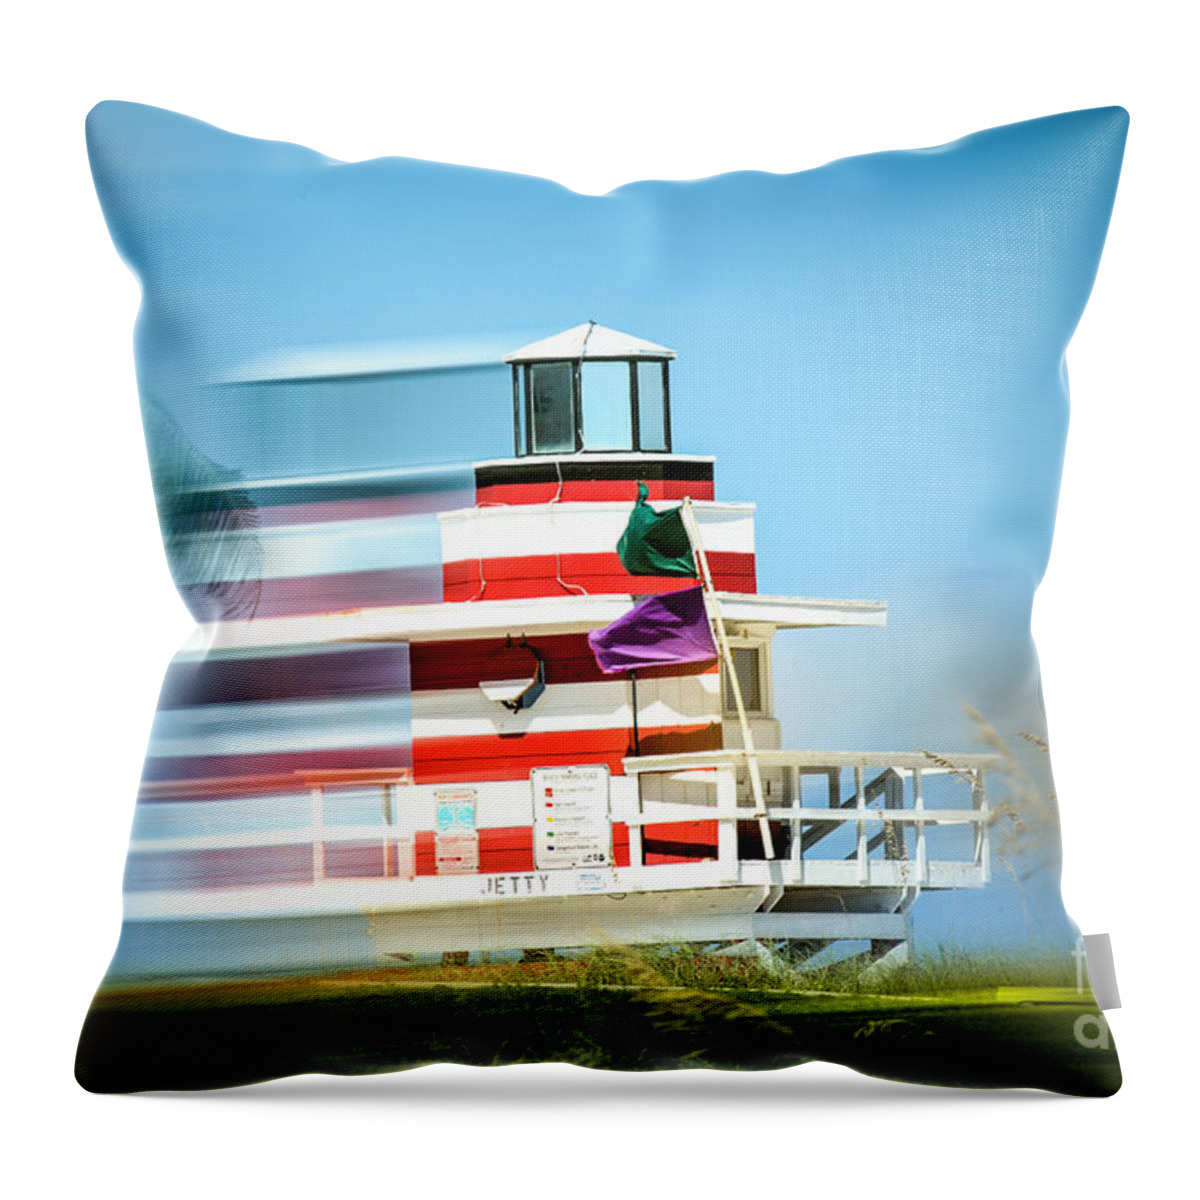  Lifeguard Stand Throw Pillow featuring the photograph Jetty 1 Lighthouse and Lifeguard Stand by Rene Triay FineArt Photos